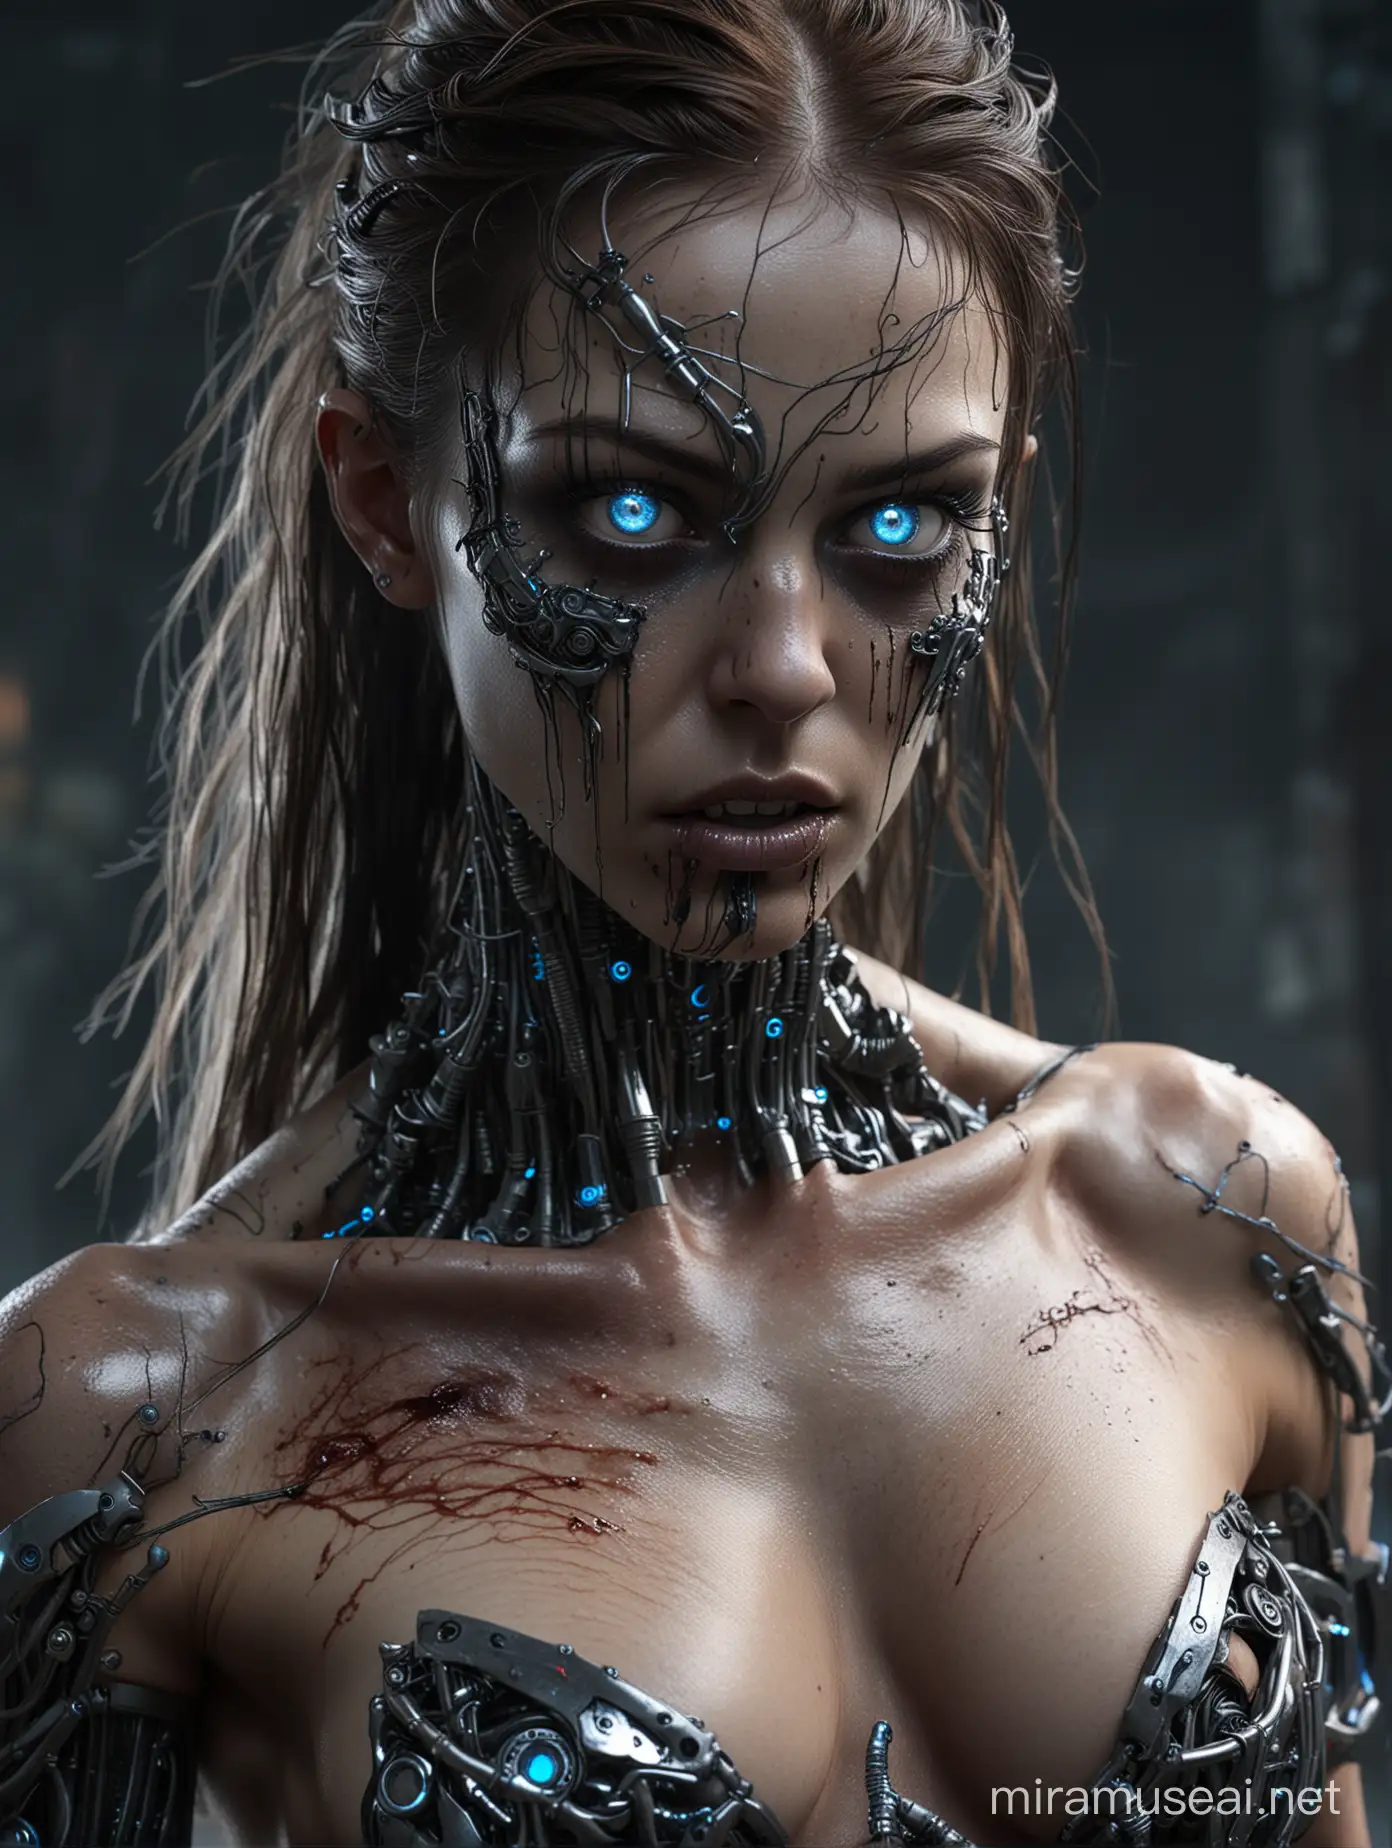 cybernetically enhanced nude female zombie with glowing blue eyes and metallic claws, gory details and exposed wires, intense close-up, revealed breasts, shot with a dark, futuristic background, High-definition rendering with intricate mechanical components and eerie, otherworldly aura